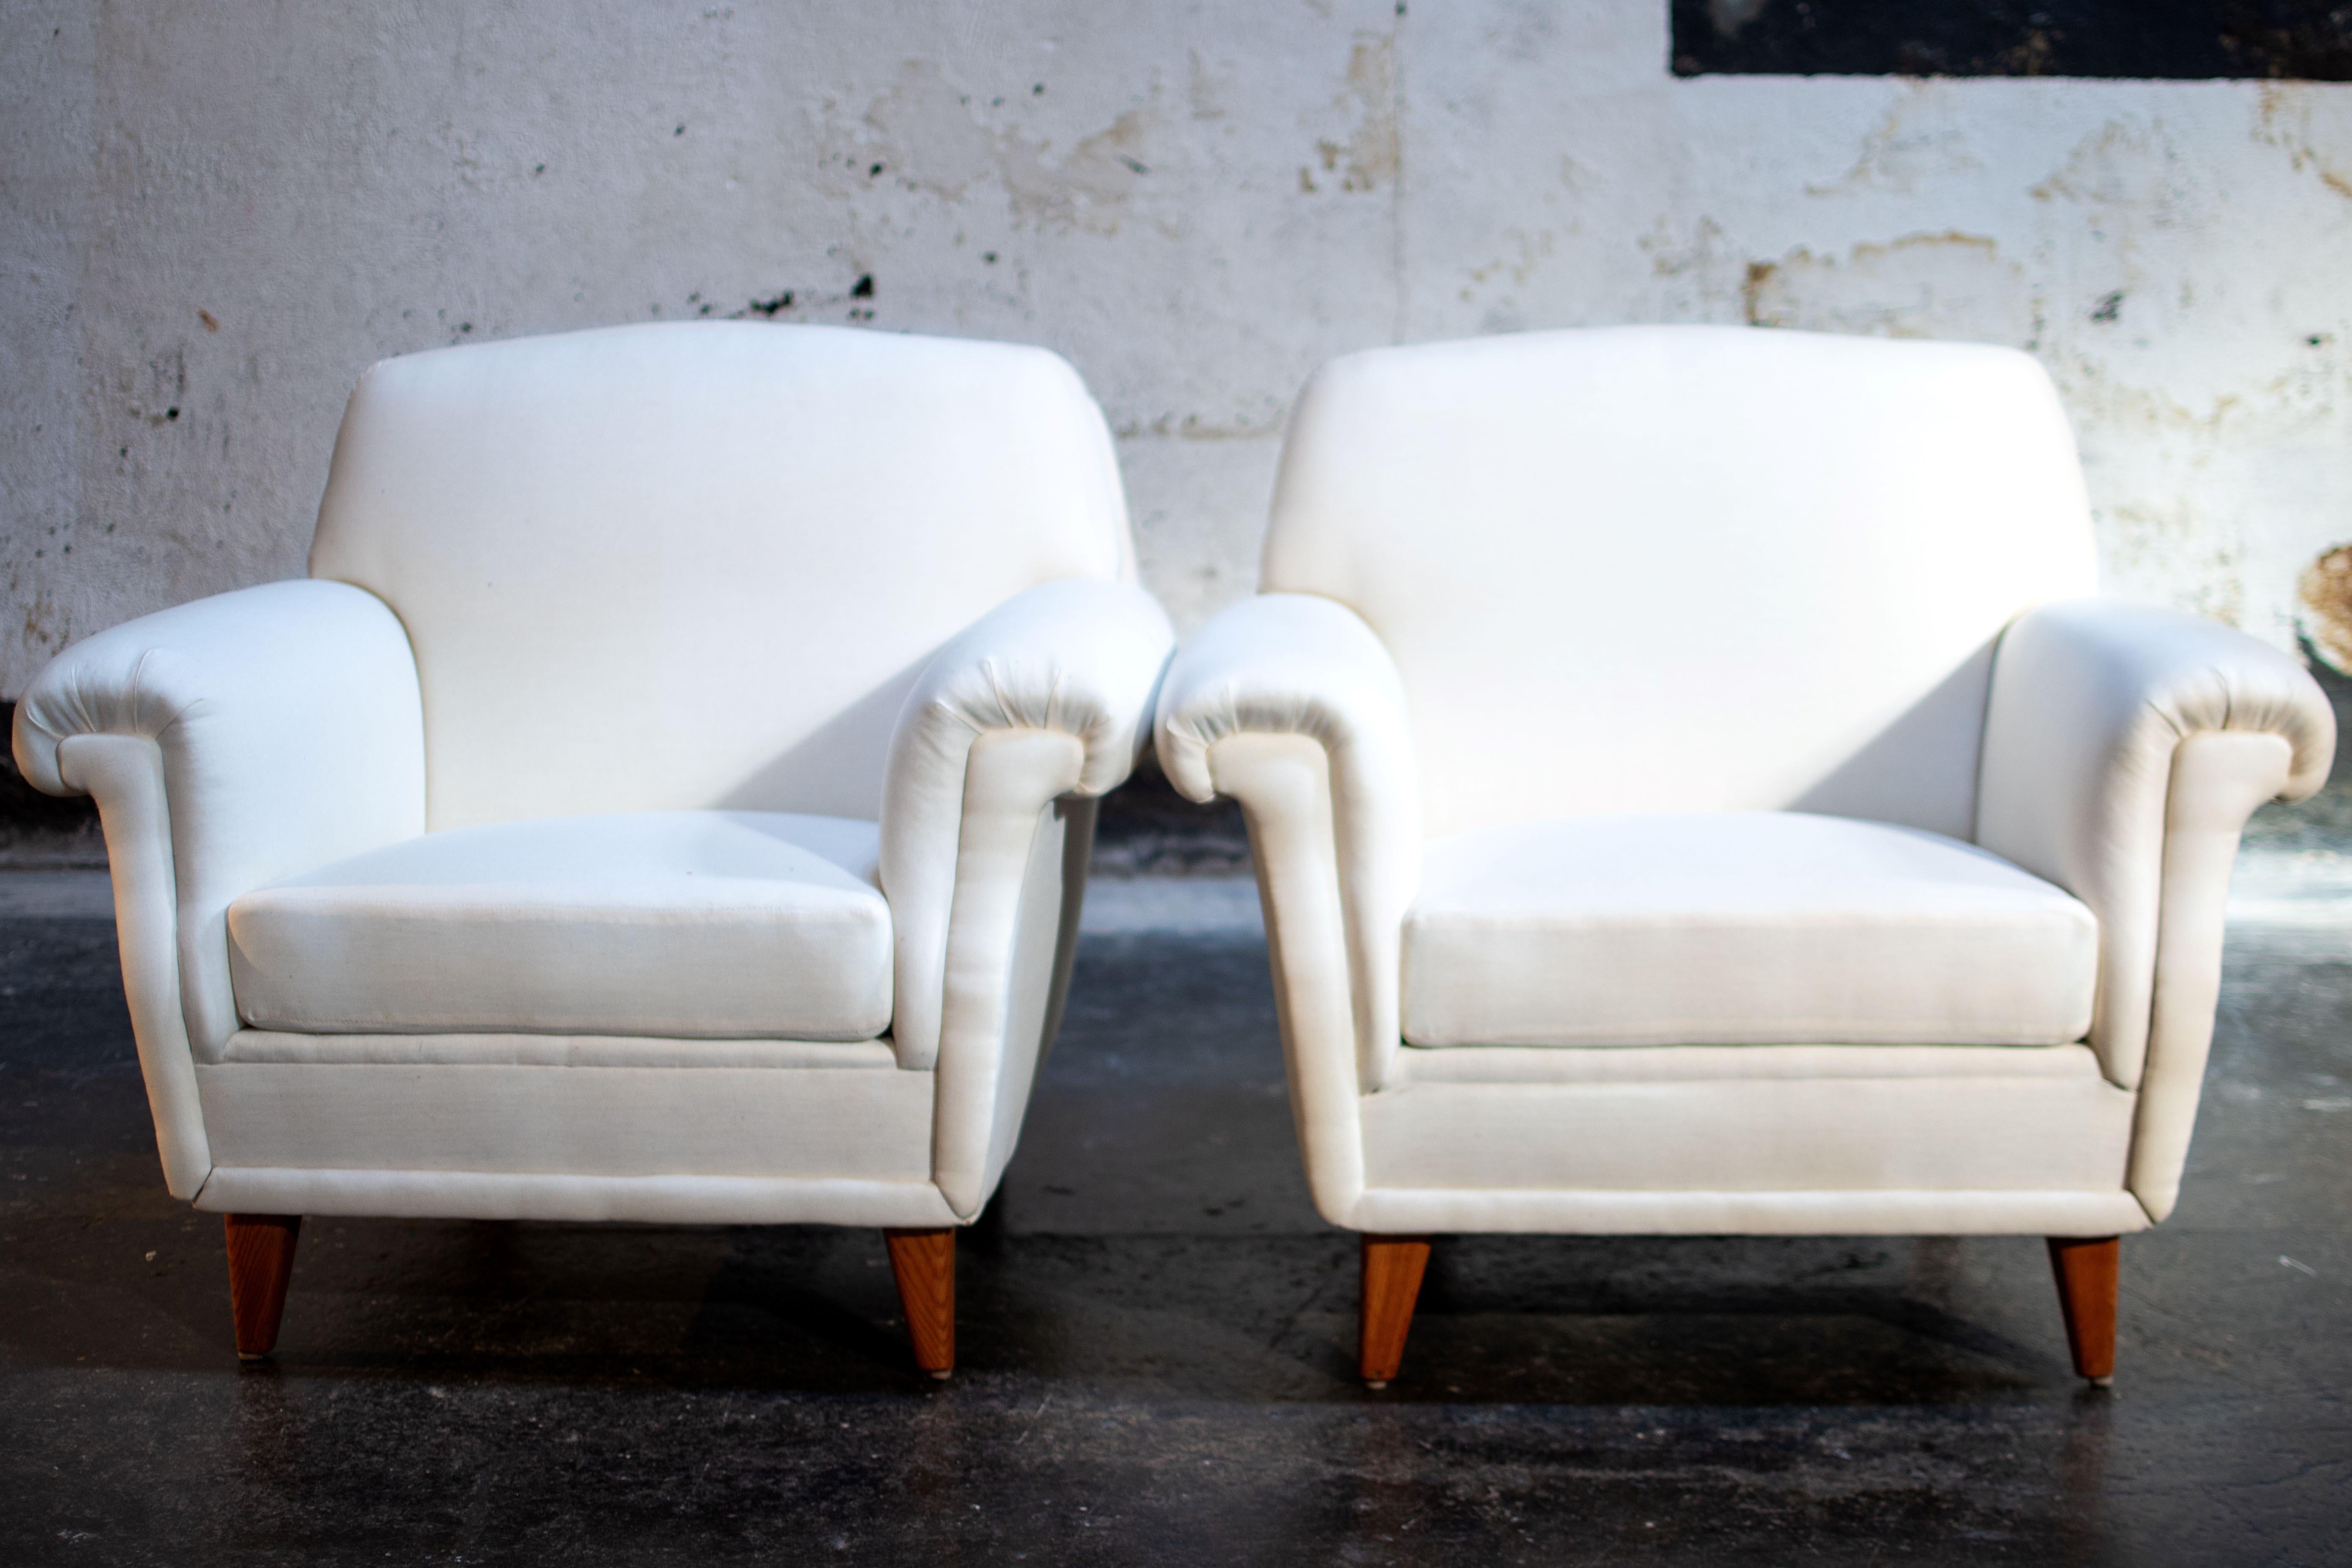 Pair of Scandinavian Modern lounge club chairs from Swedish heritage brand Broderna Anderssons. Broderna Anderssons has been manufacturing furniture for over 100 years. They are a family owned and operated business with a focus on craftsman and